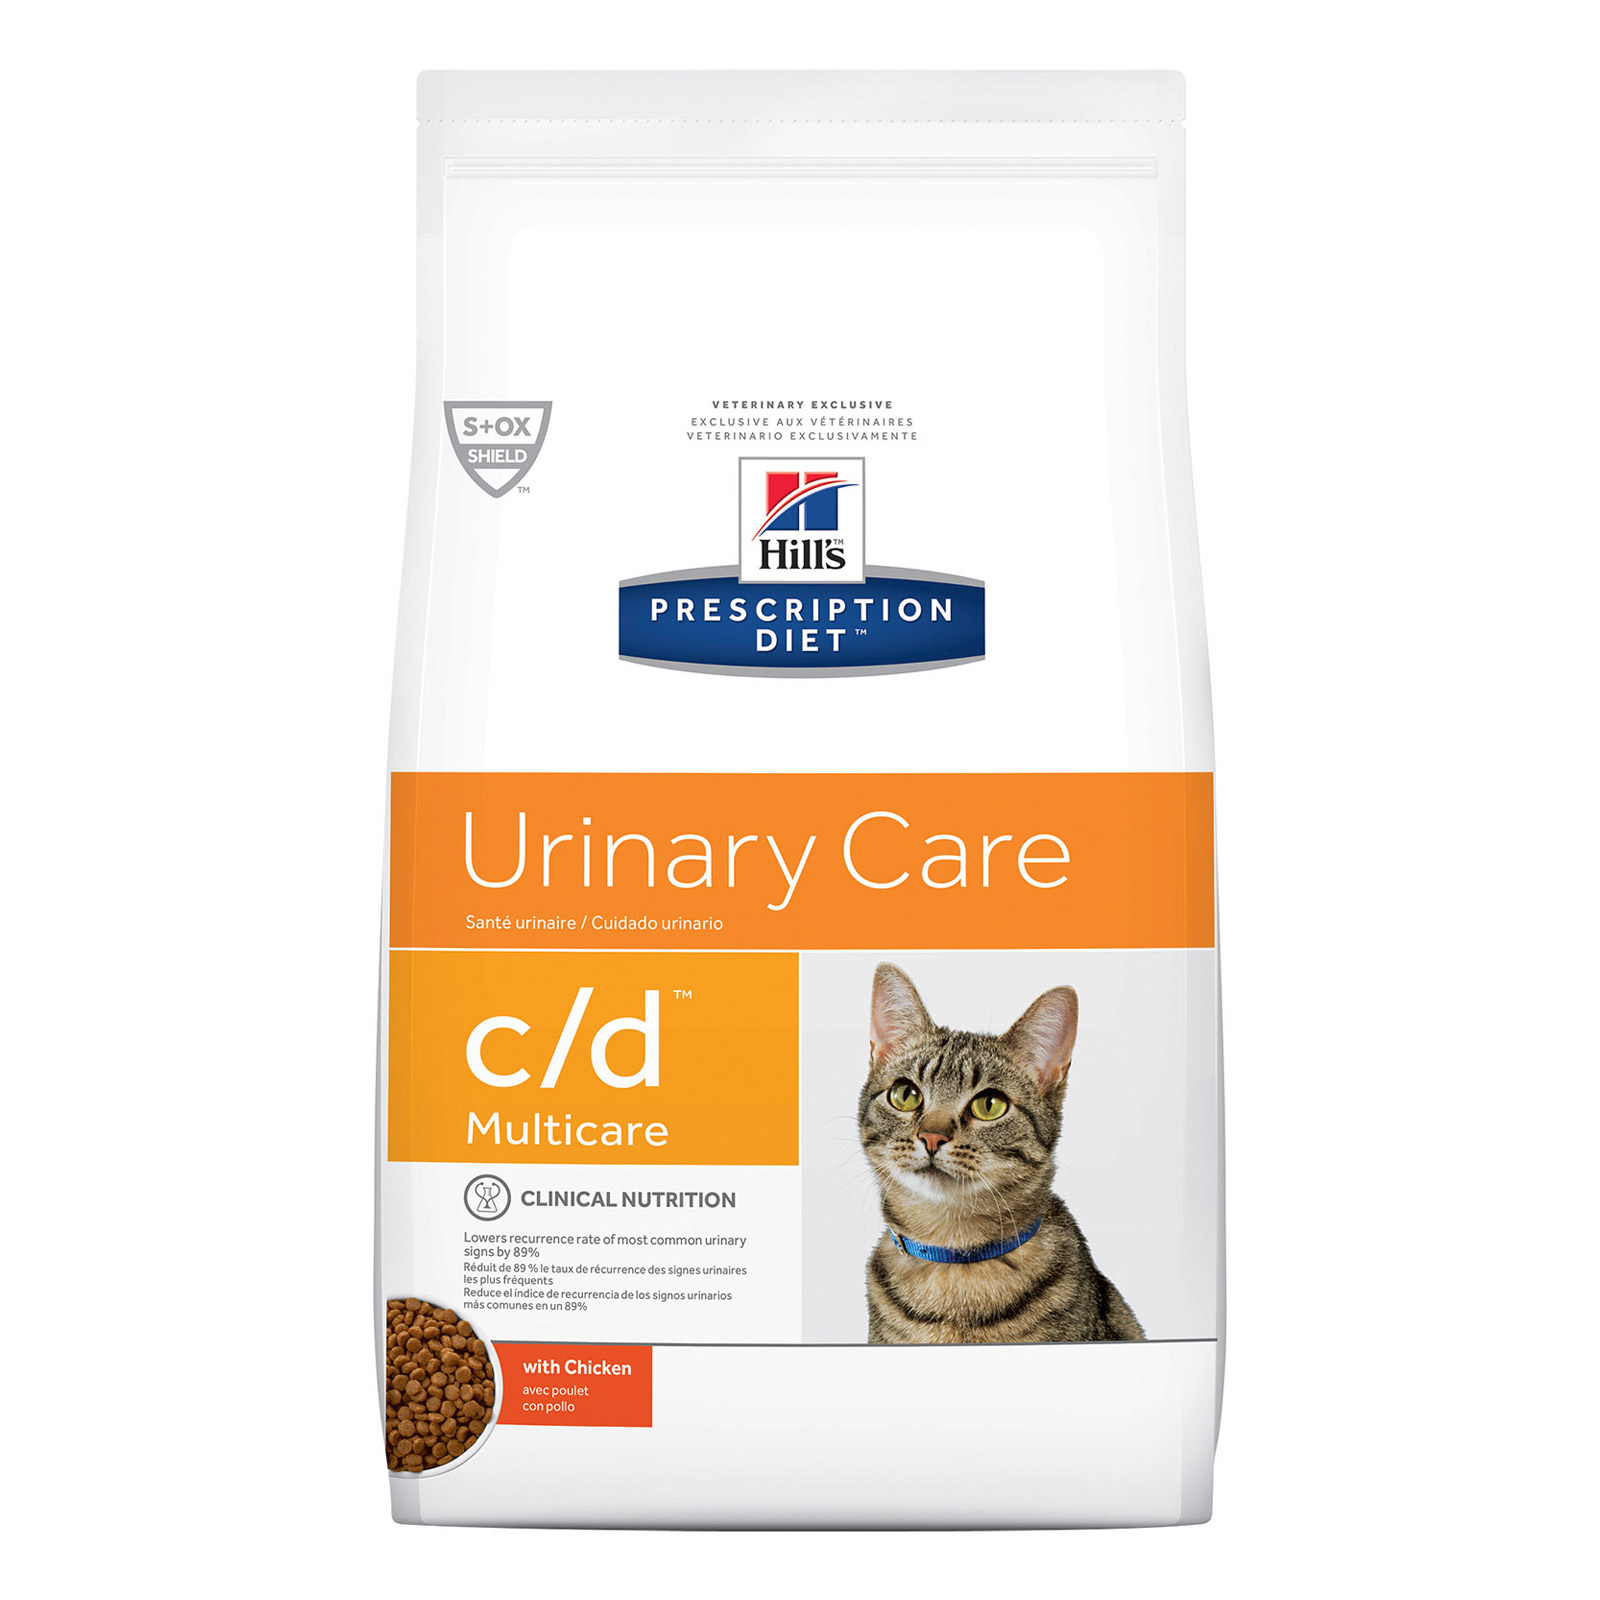 Hill's Prescription Diet c/d Feline Multicare Urinary Care with Chicken Dry for Food